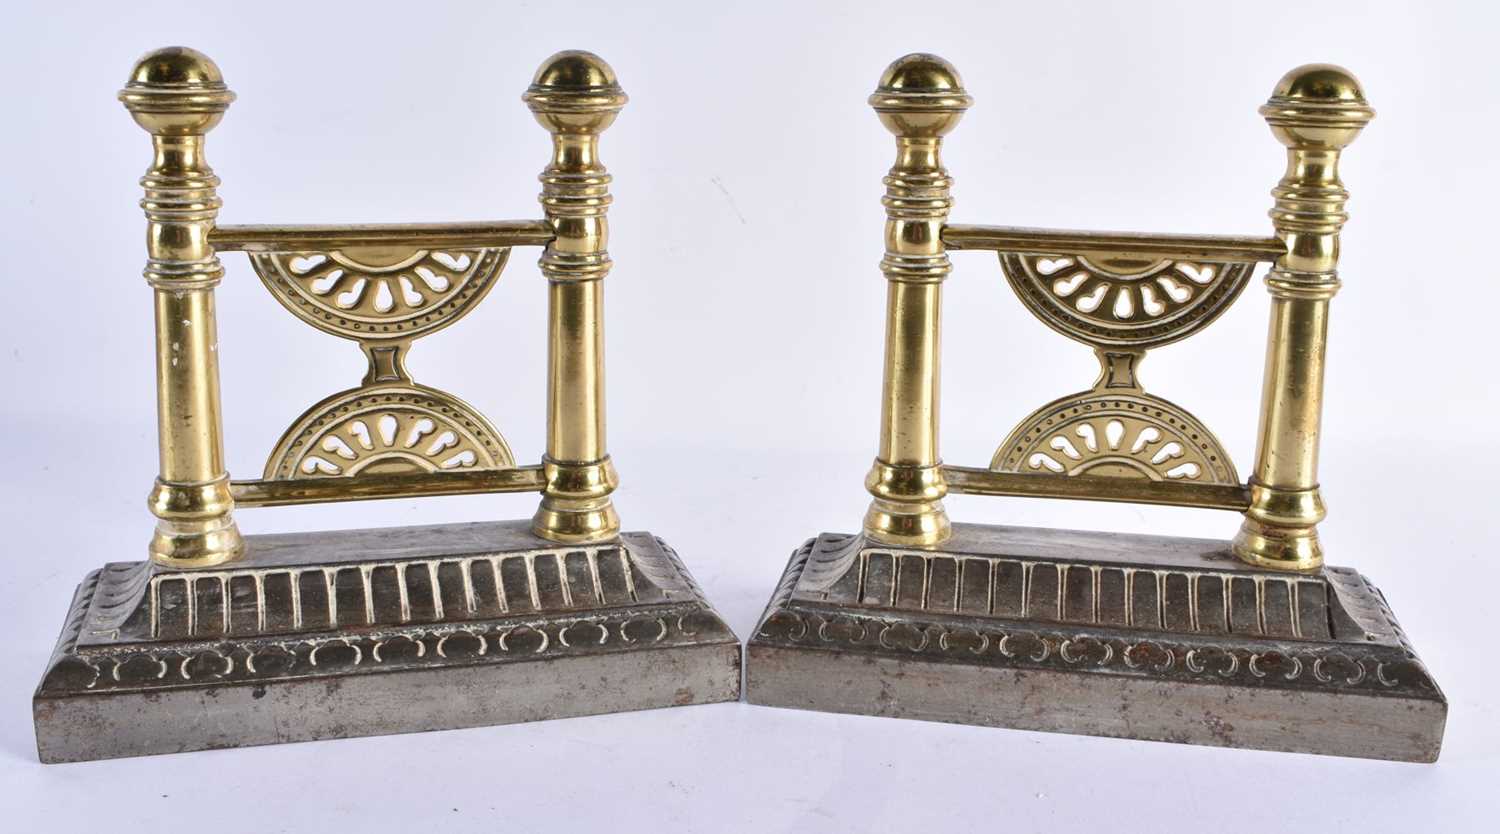 A LOVELY PAIR OF 19TH CENTURY ENGLISH AESTHETIC MOVEMENT BRONZE AND STEEL FIRESIDE DOGS Attributed - Image 5 of 6